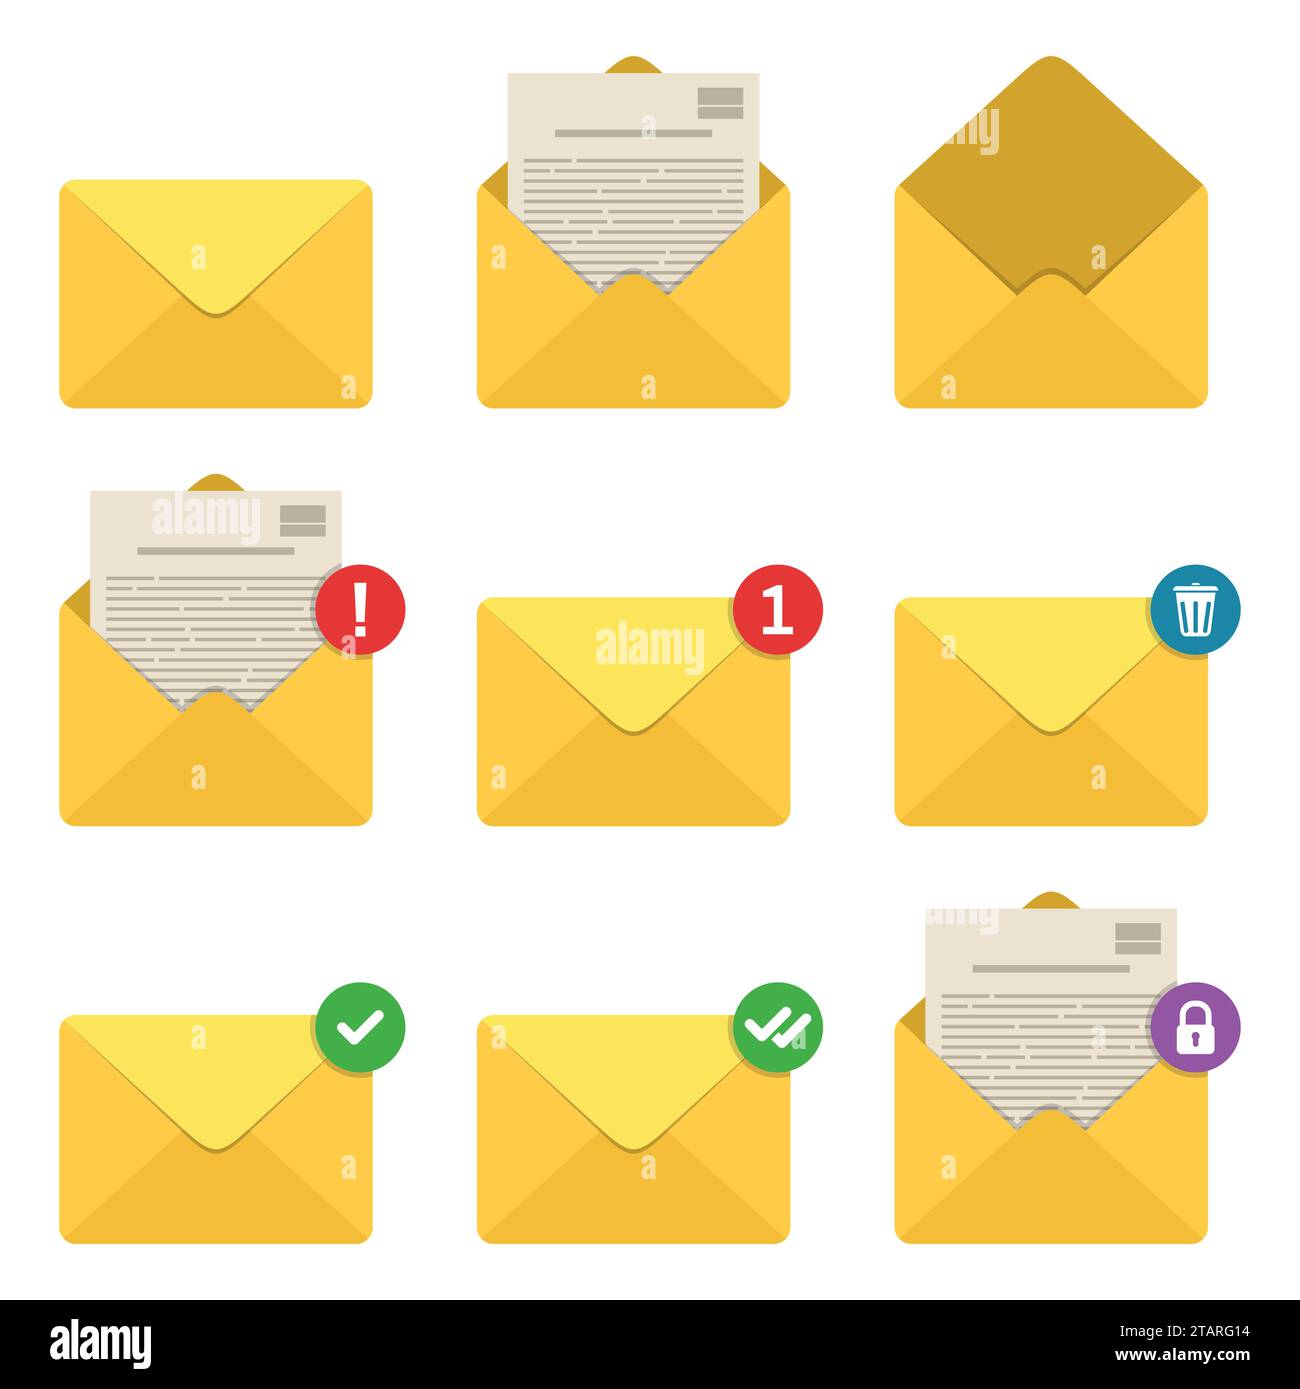 Mail envelope notifications icons set. Concept of incoming email messages, communication, mail delivery service for social network, web or mobile app. Stock Vector